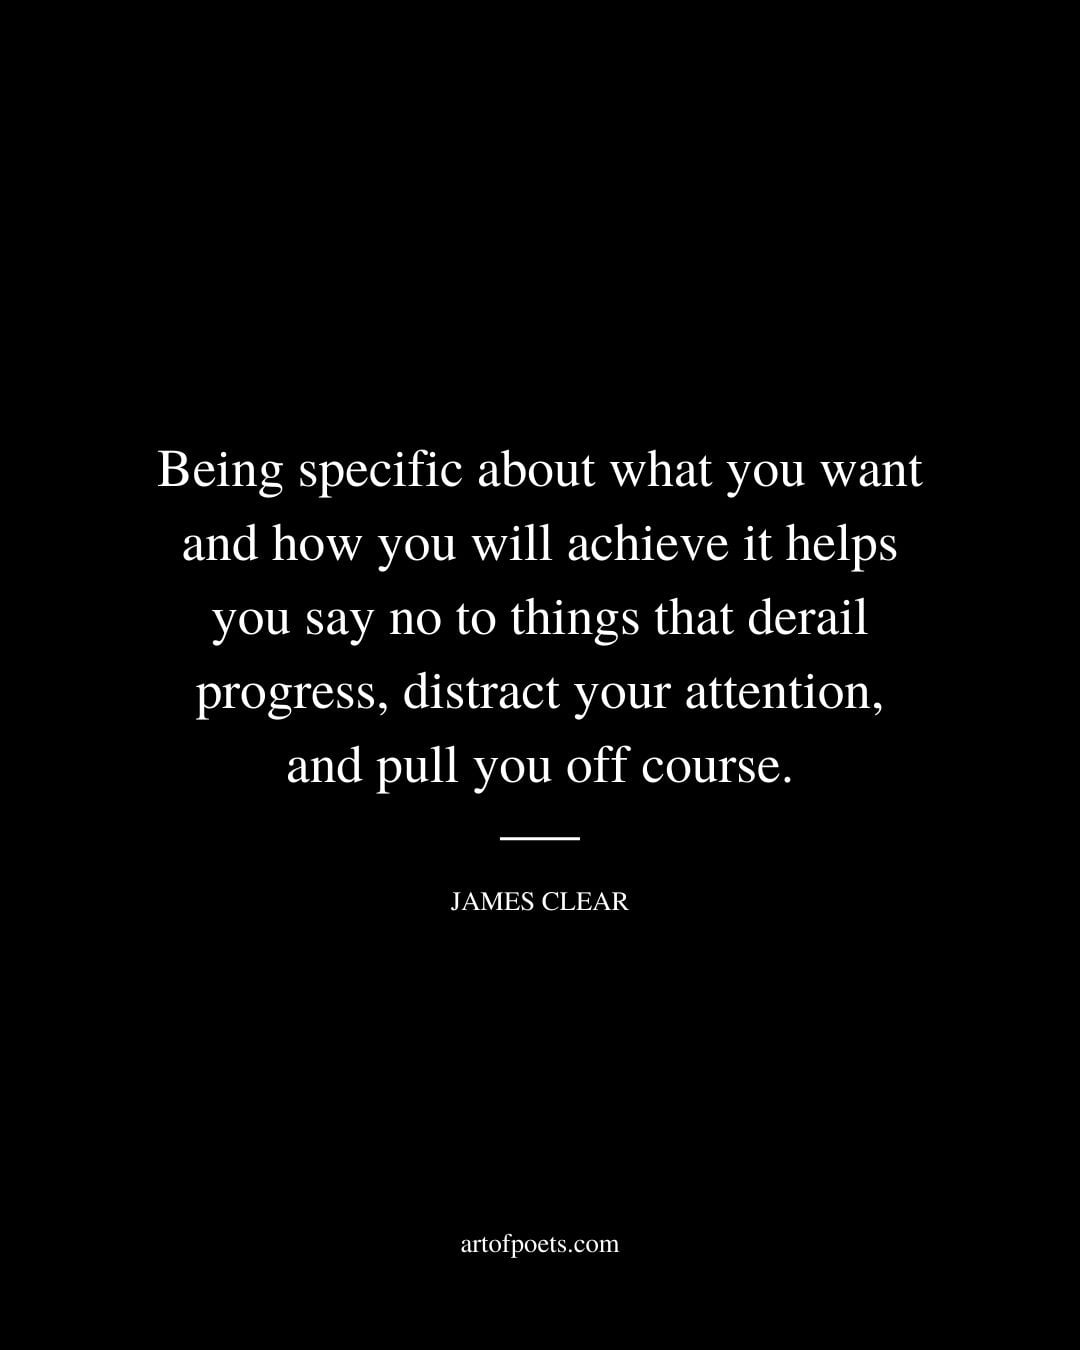 Being specific about what you want and how you will achieve it helps you say no to things that derail progress distract your attention and pull you off course